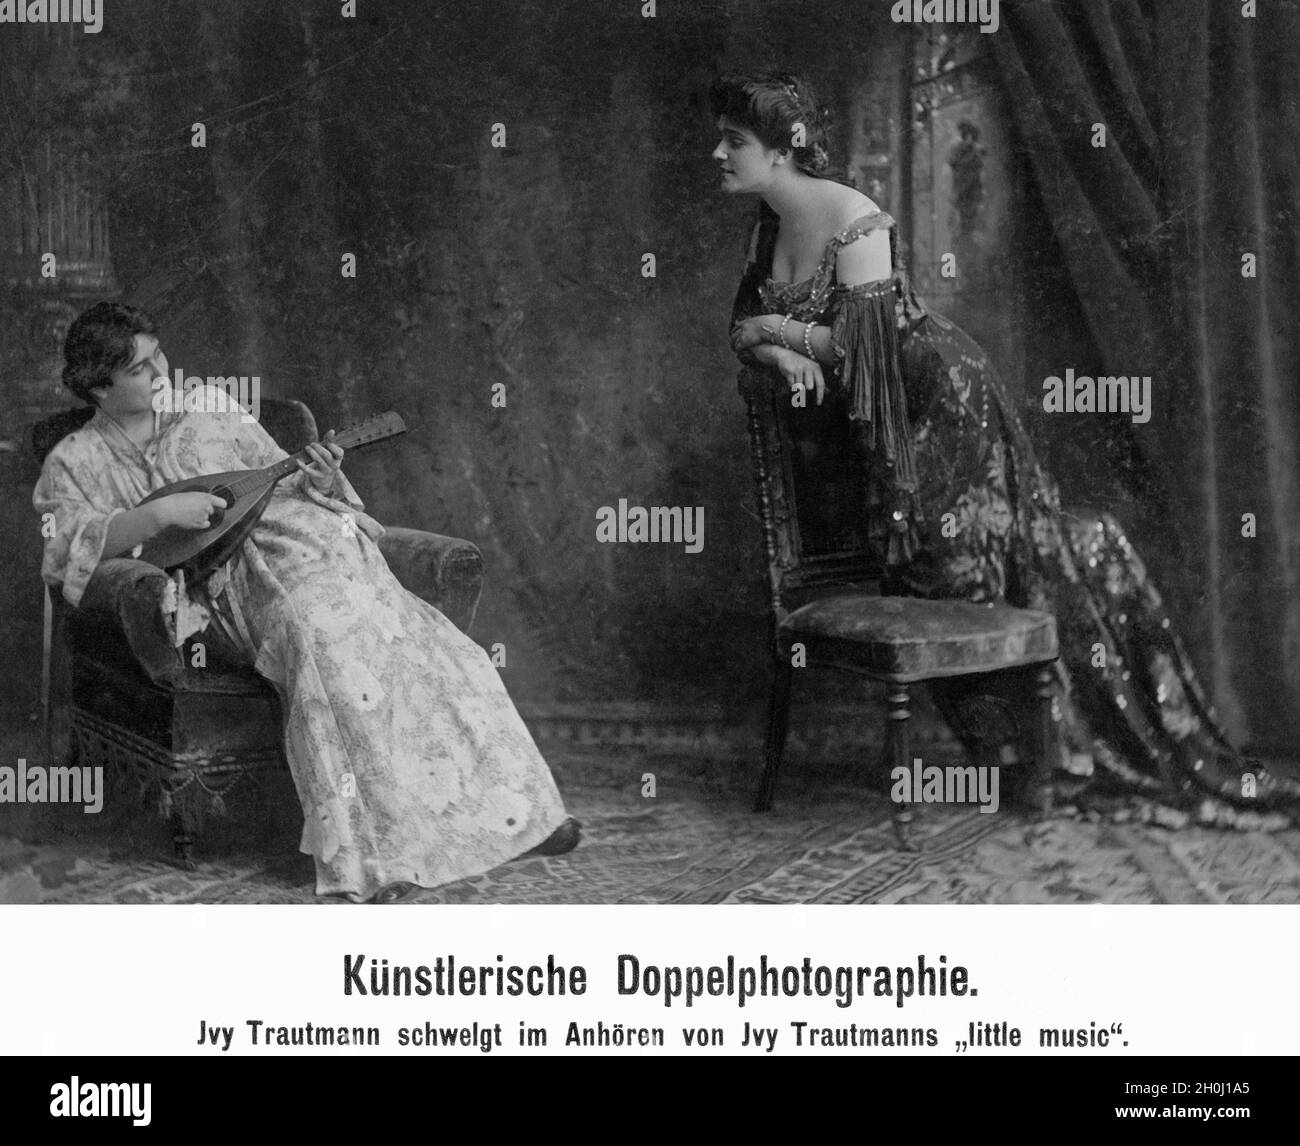 "Artistic double photograph from 1921: Jvy Trautmann revels in listening to Jvy Trautmann's ""little music"". [automated translation]" Stock Photo